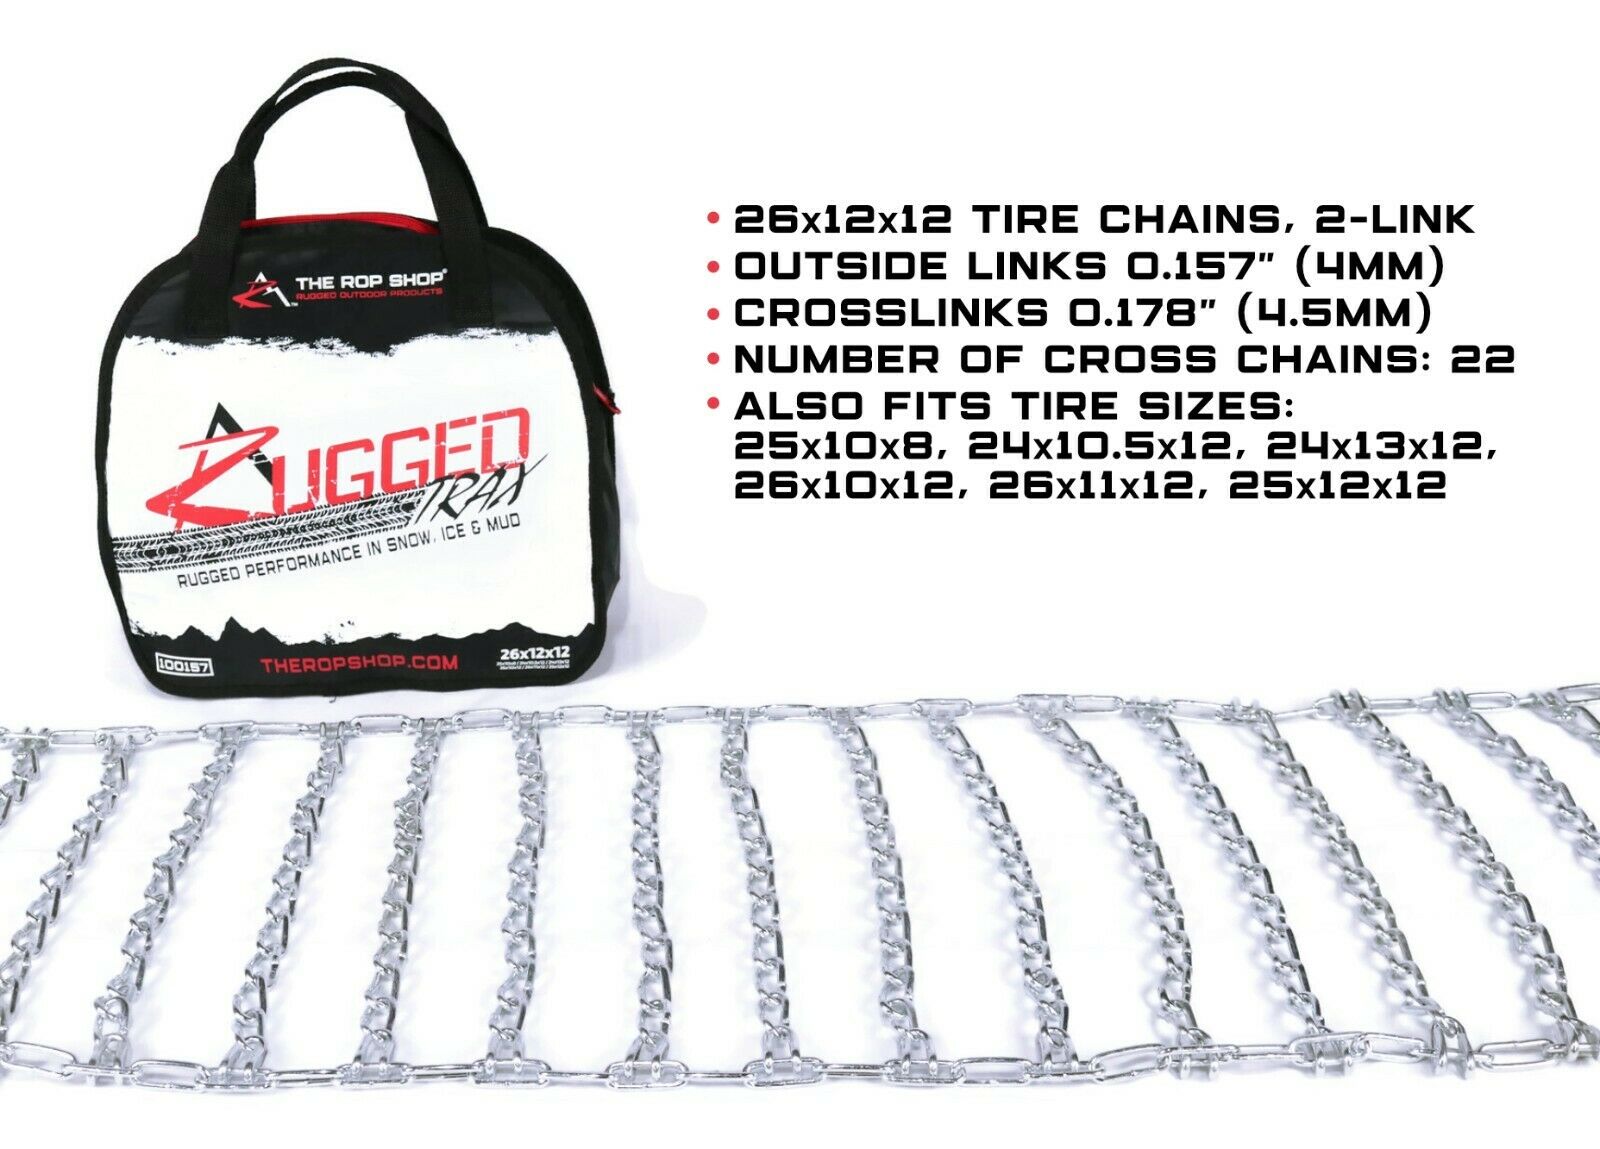 The ROP Shop | 26x12-12 Tire Chains 2 Link John Deere 400 & X Series Lawn Mower Tractor Rider - image 2 of 6